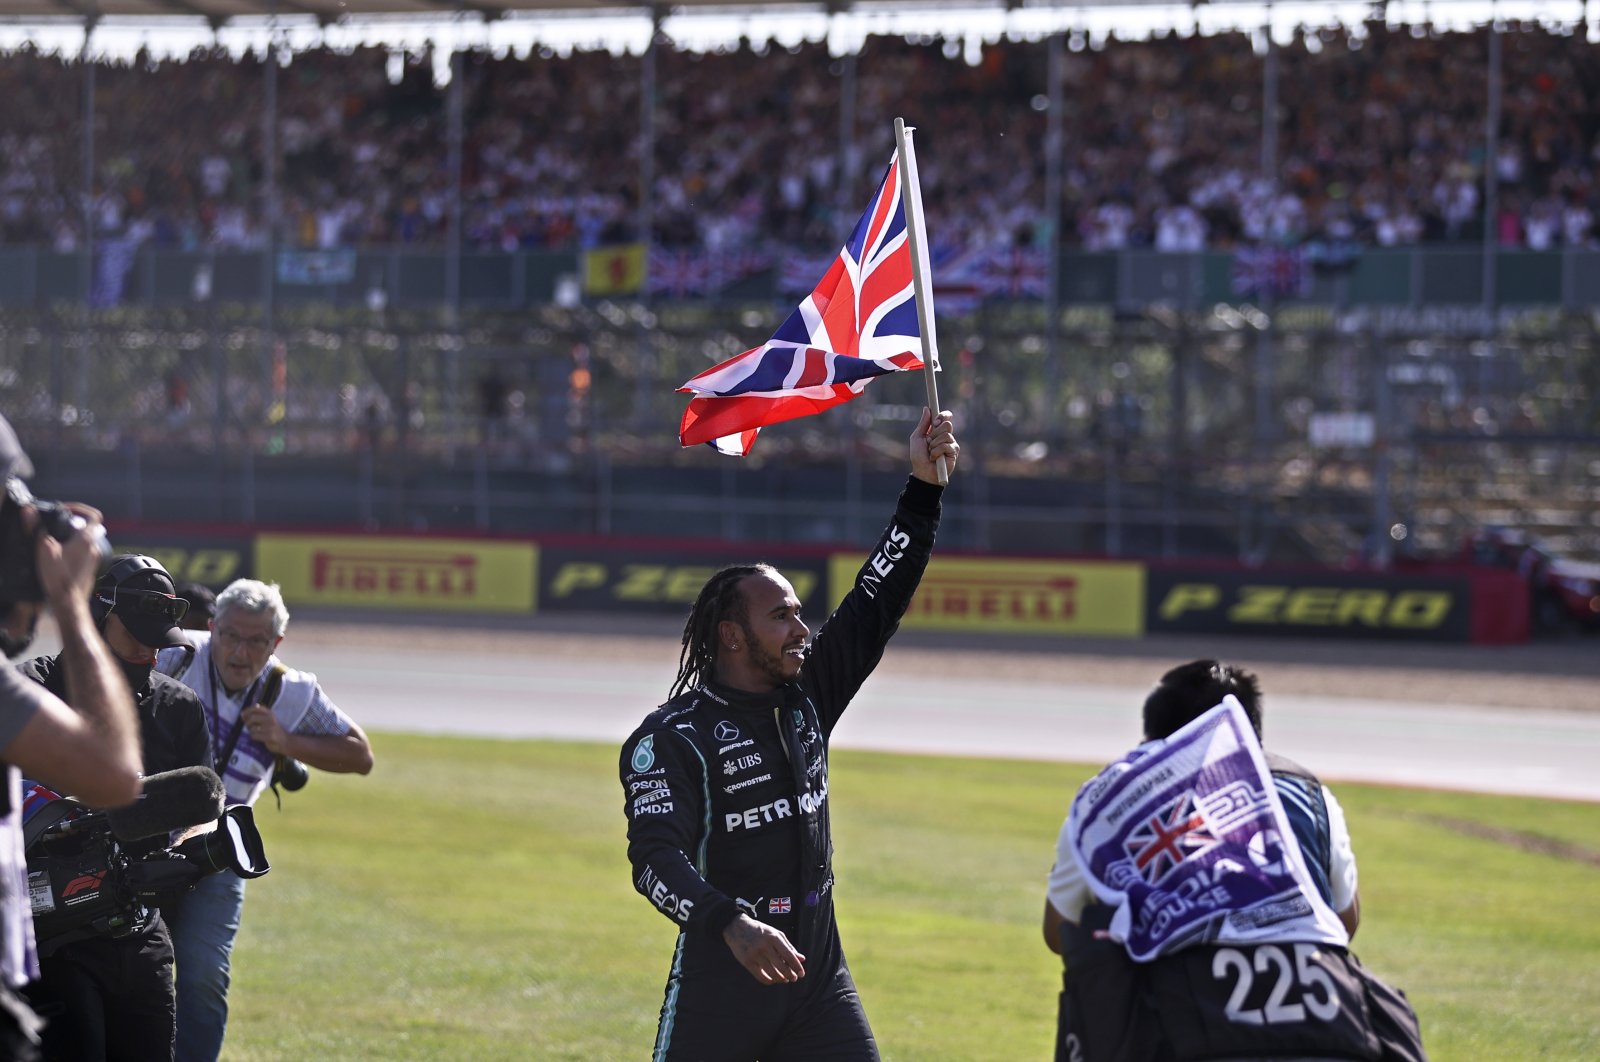 Mercedes driver Lewis Hamilton of Britain celebrates after winning the British Formula One Grand Prix, at the Silverstone circuit, in Silverstone, England, Sunday, July 18, 2021. (Lars Baron/Pool photo via AP)